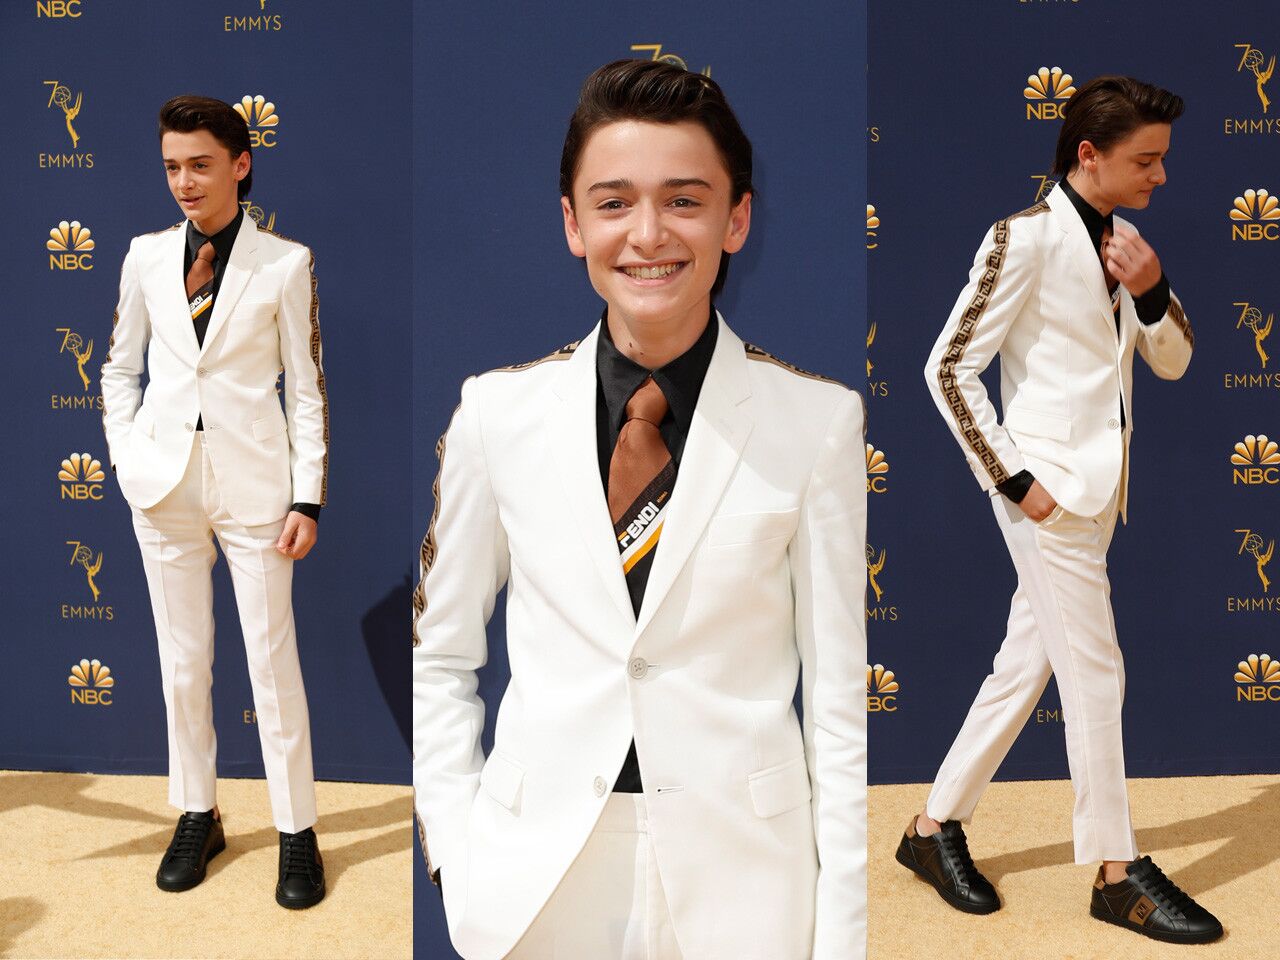 We didn't love Noah Schnapp's logomania Emmys outfit for the 2018 Emmy Awards. Although he's wearing the "it brand" of the moment, this look goes overboard with logos. It would have worked better with an understated tie. That's why his look is on our worst-dressed list.